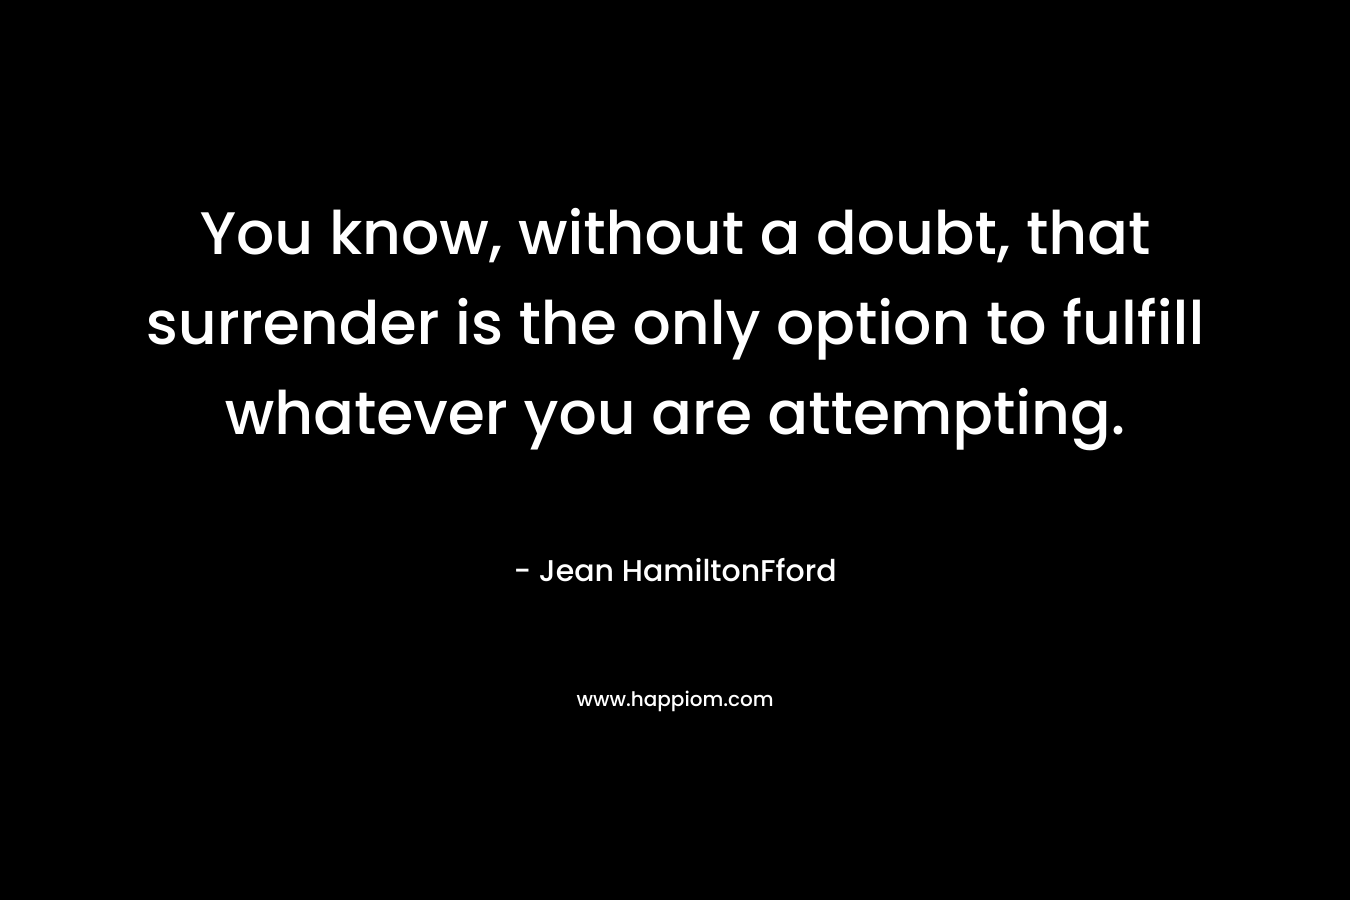 You know, without a doubt, that surrender is the only option to fulfill whatever you are attempting. – Jean HamiltonFford